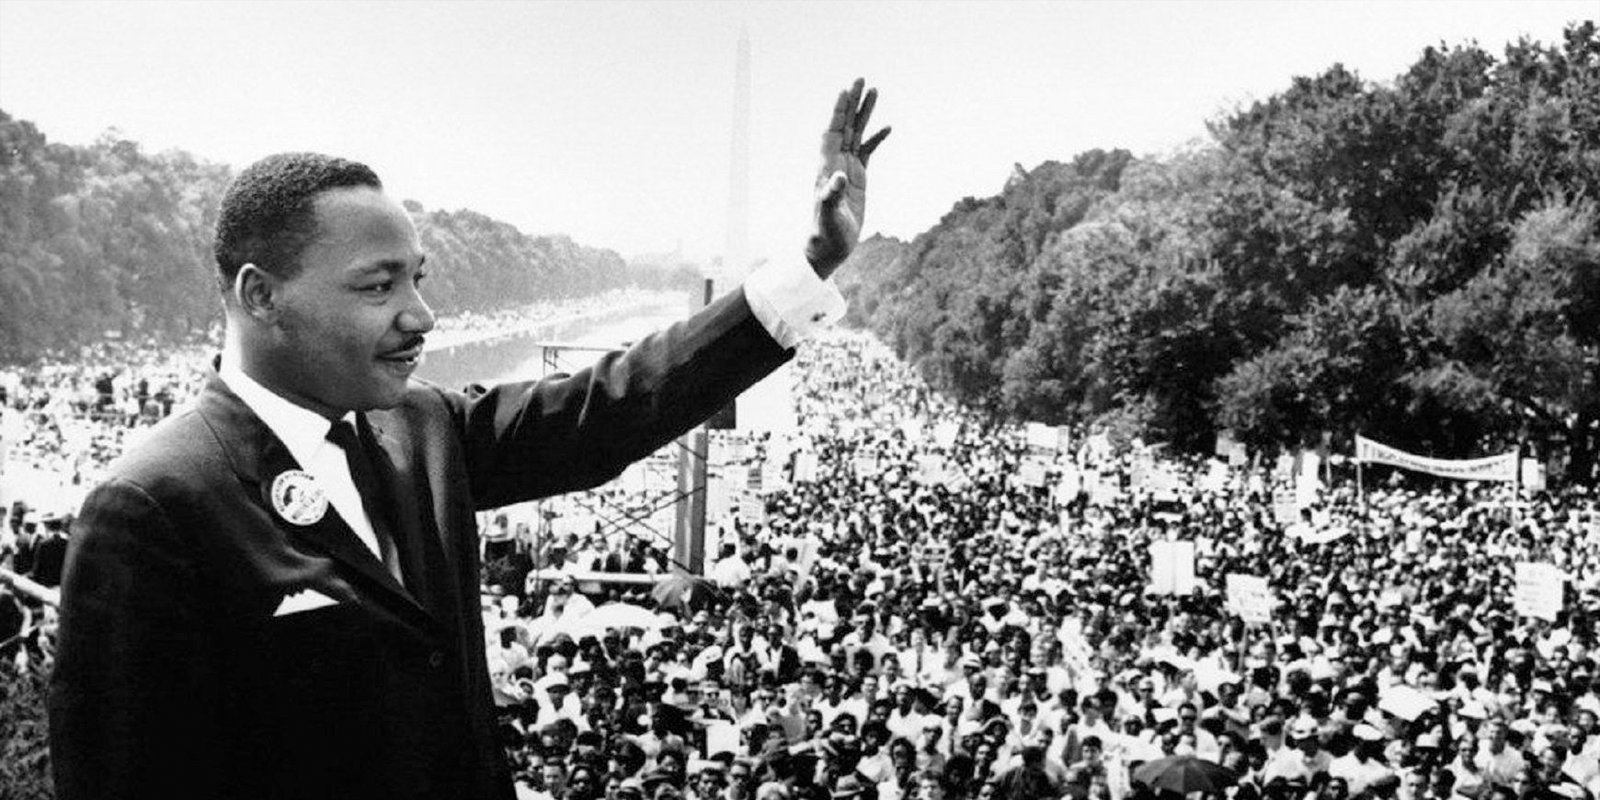 Image of Martin Luther King Jr. giving a speech in Washington, DC.